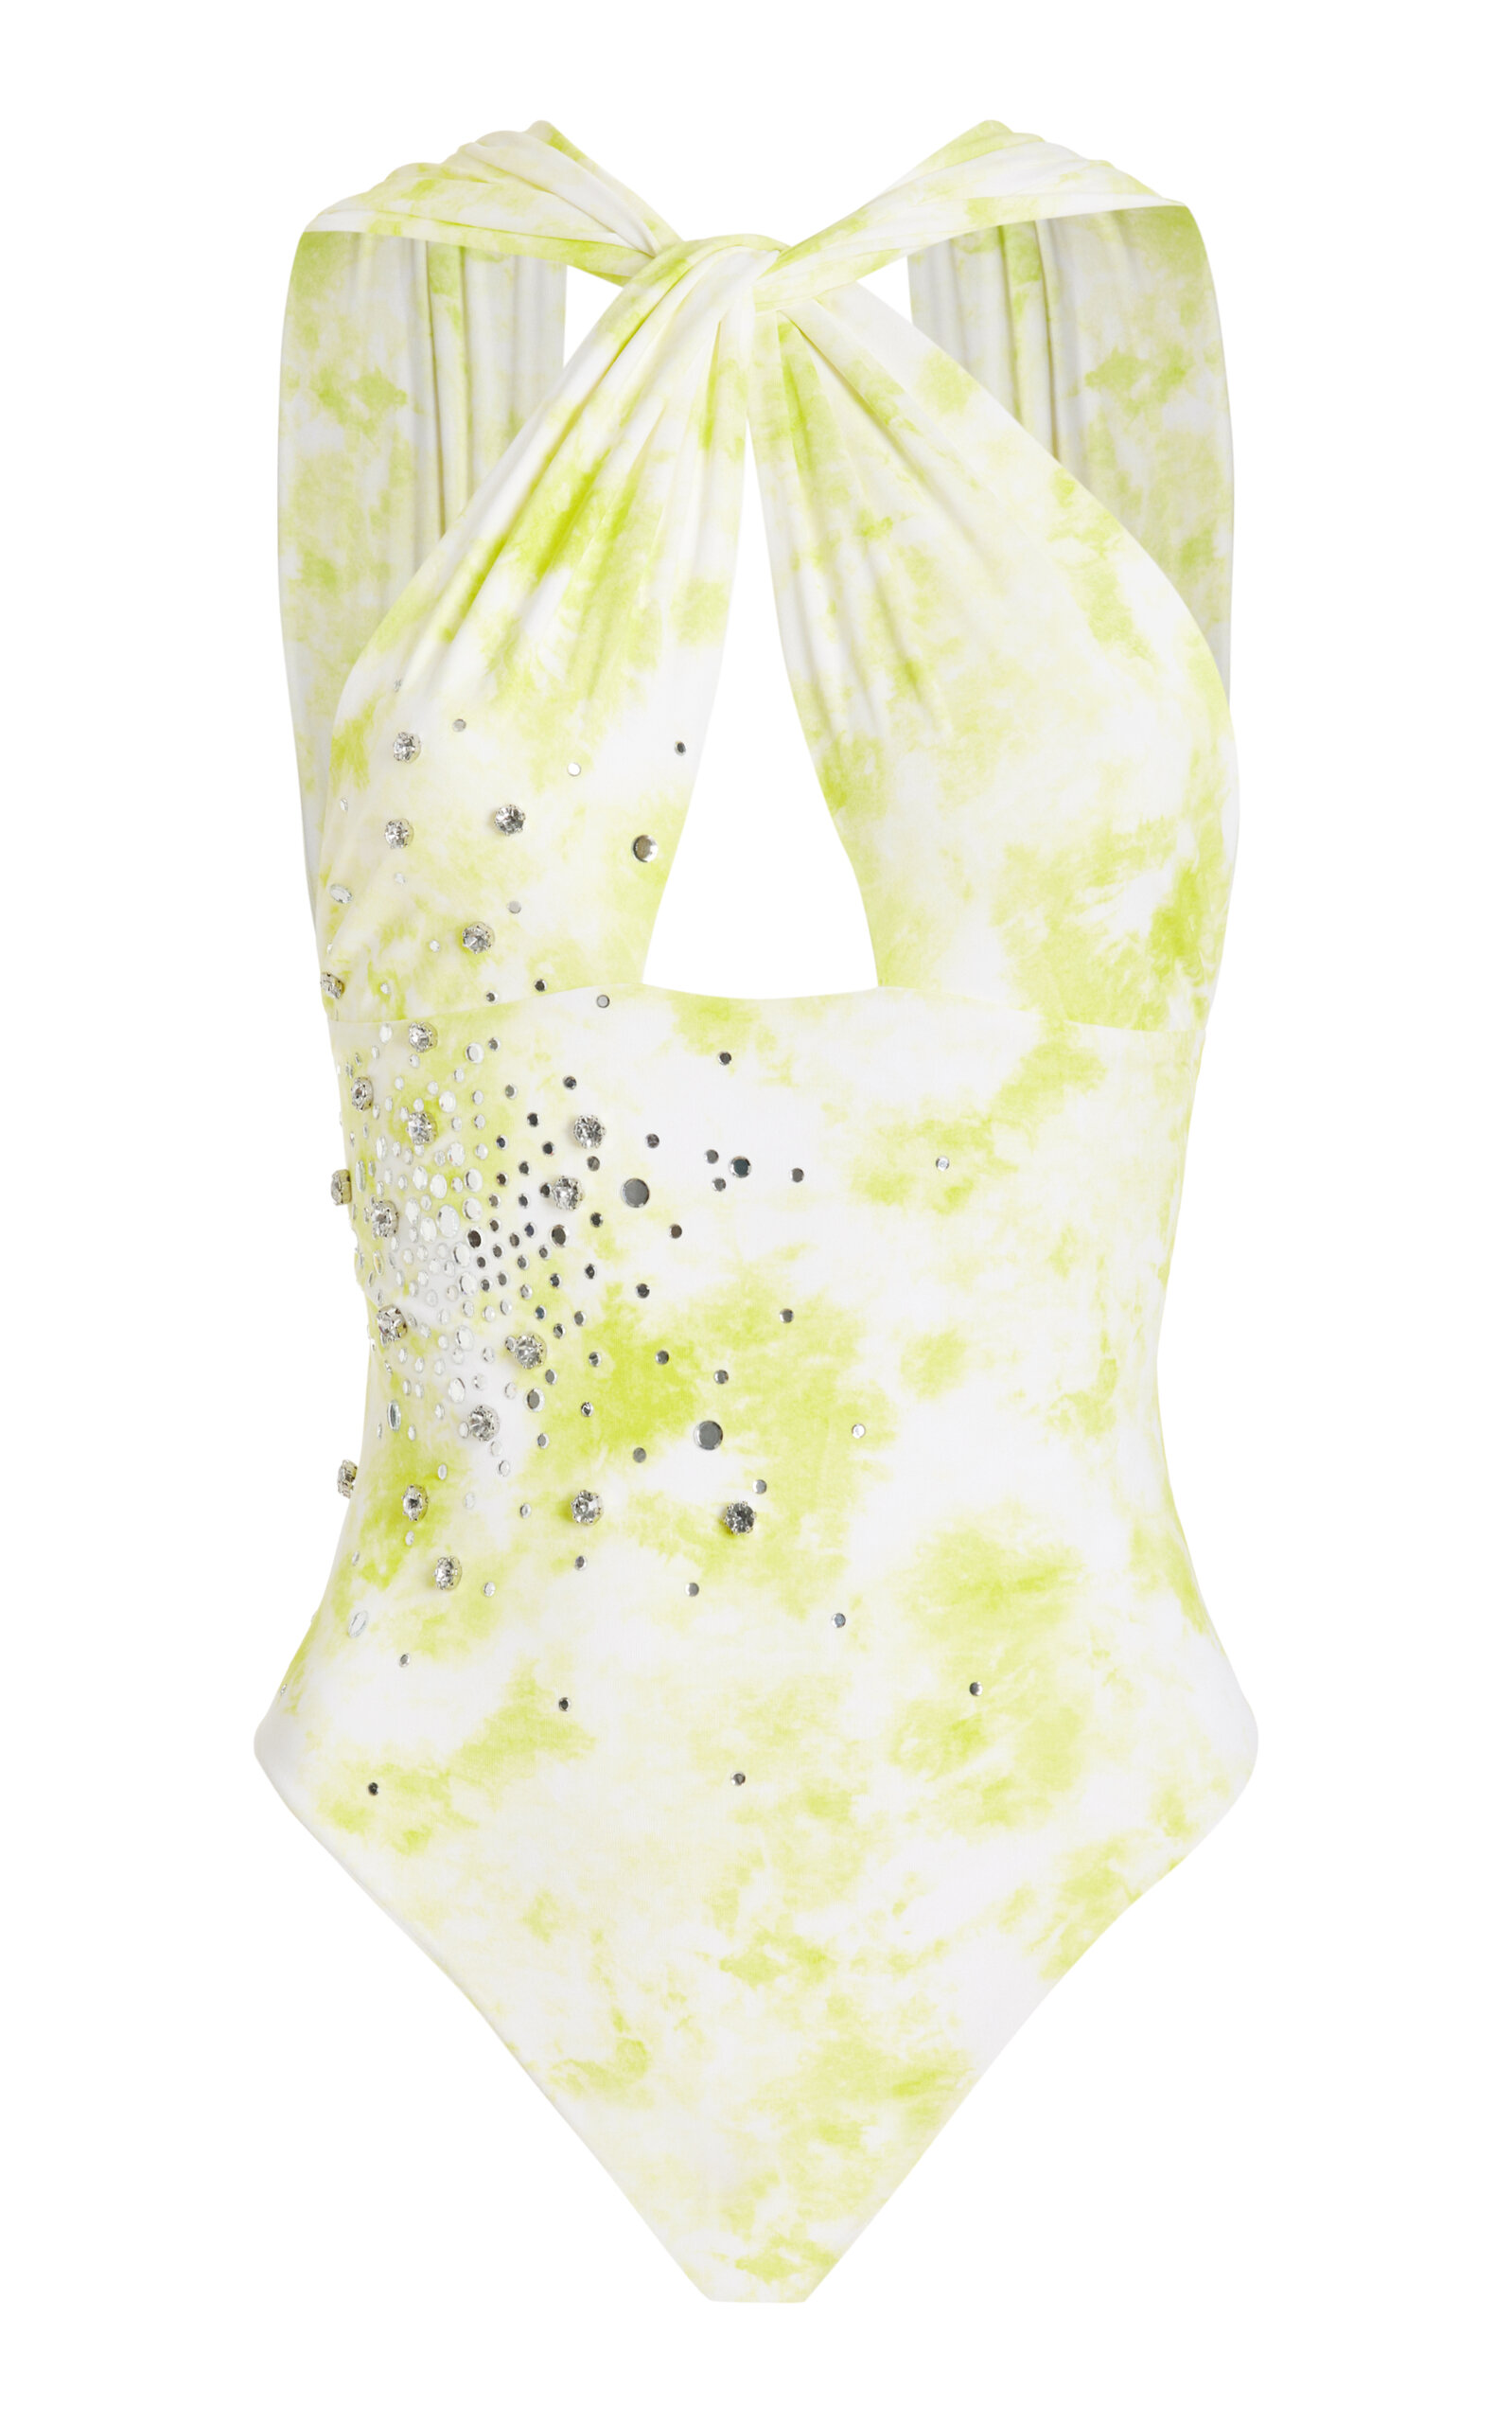 Exclusive Crystal-Embellished Tie-Dyed One-Piece Swimsuit